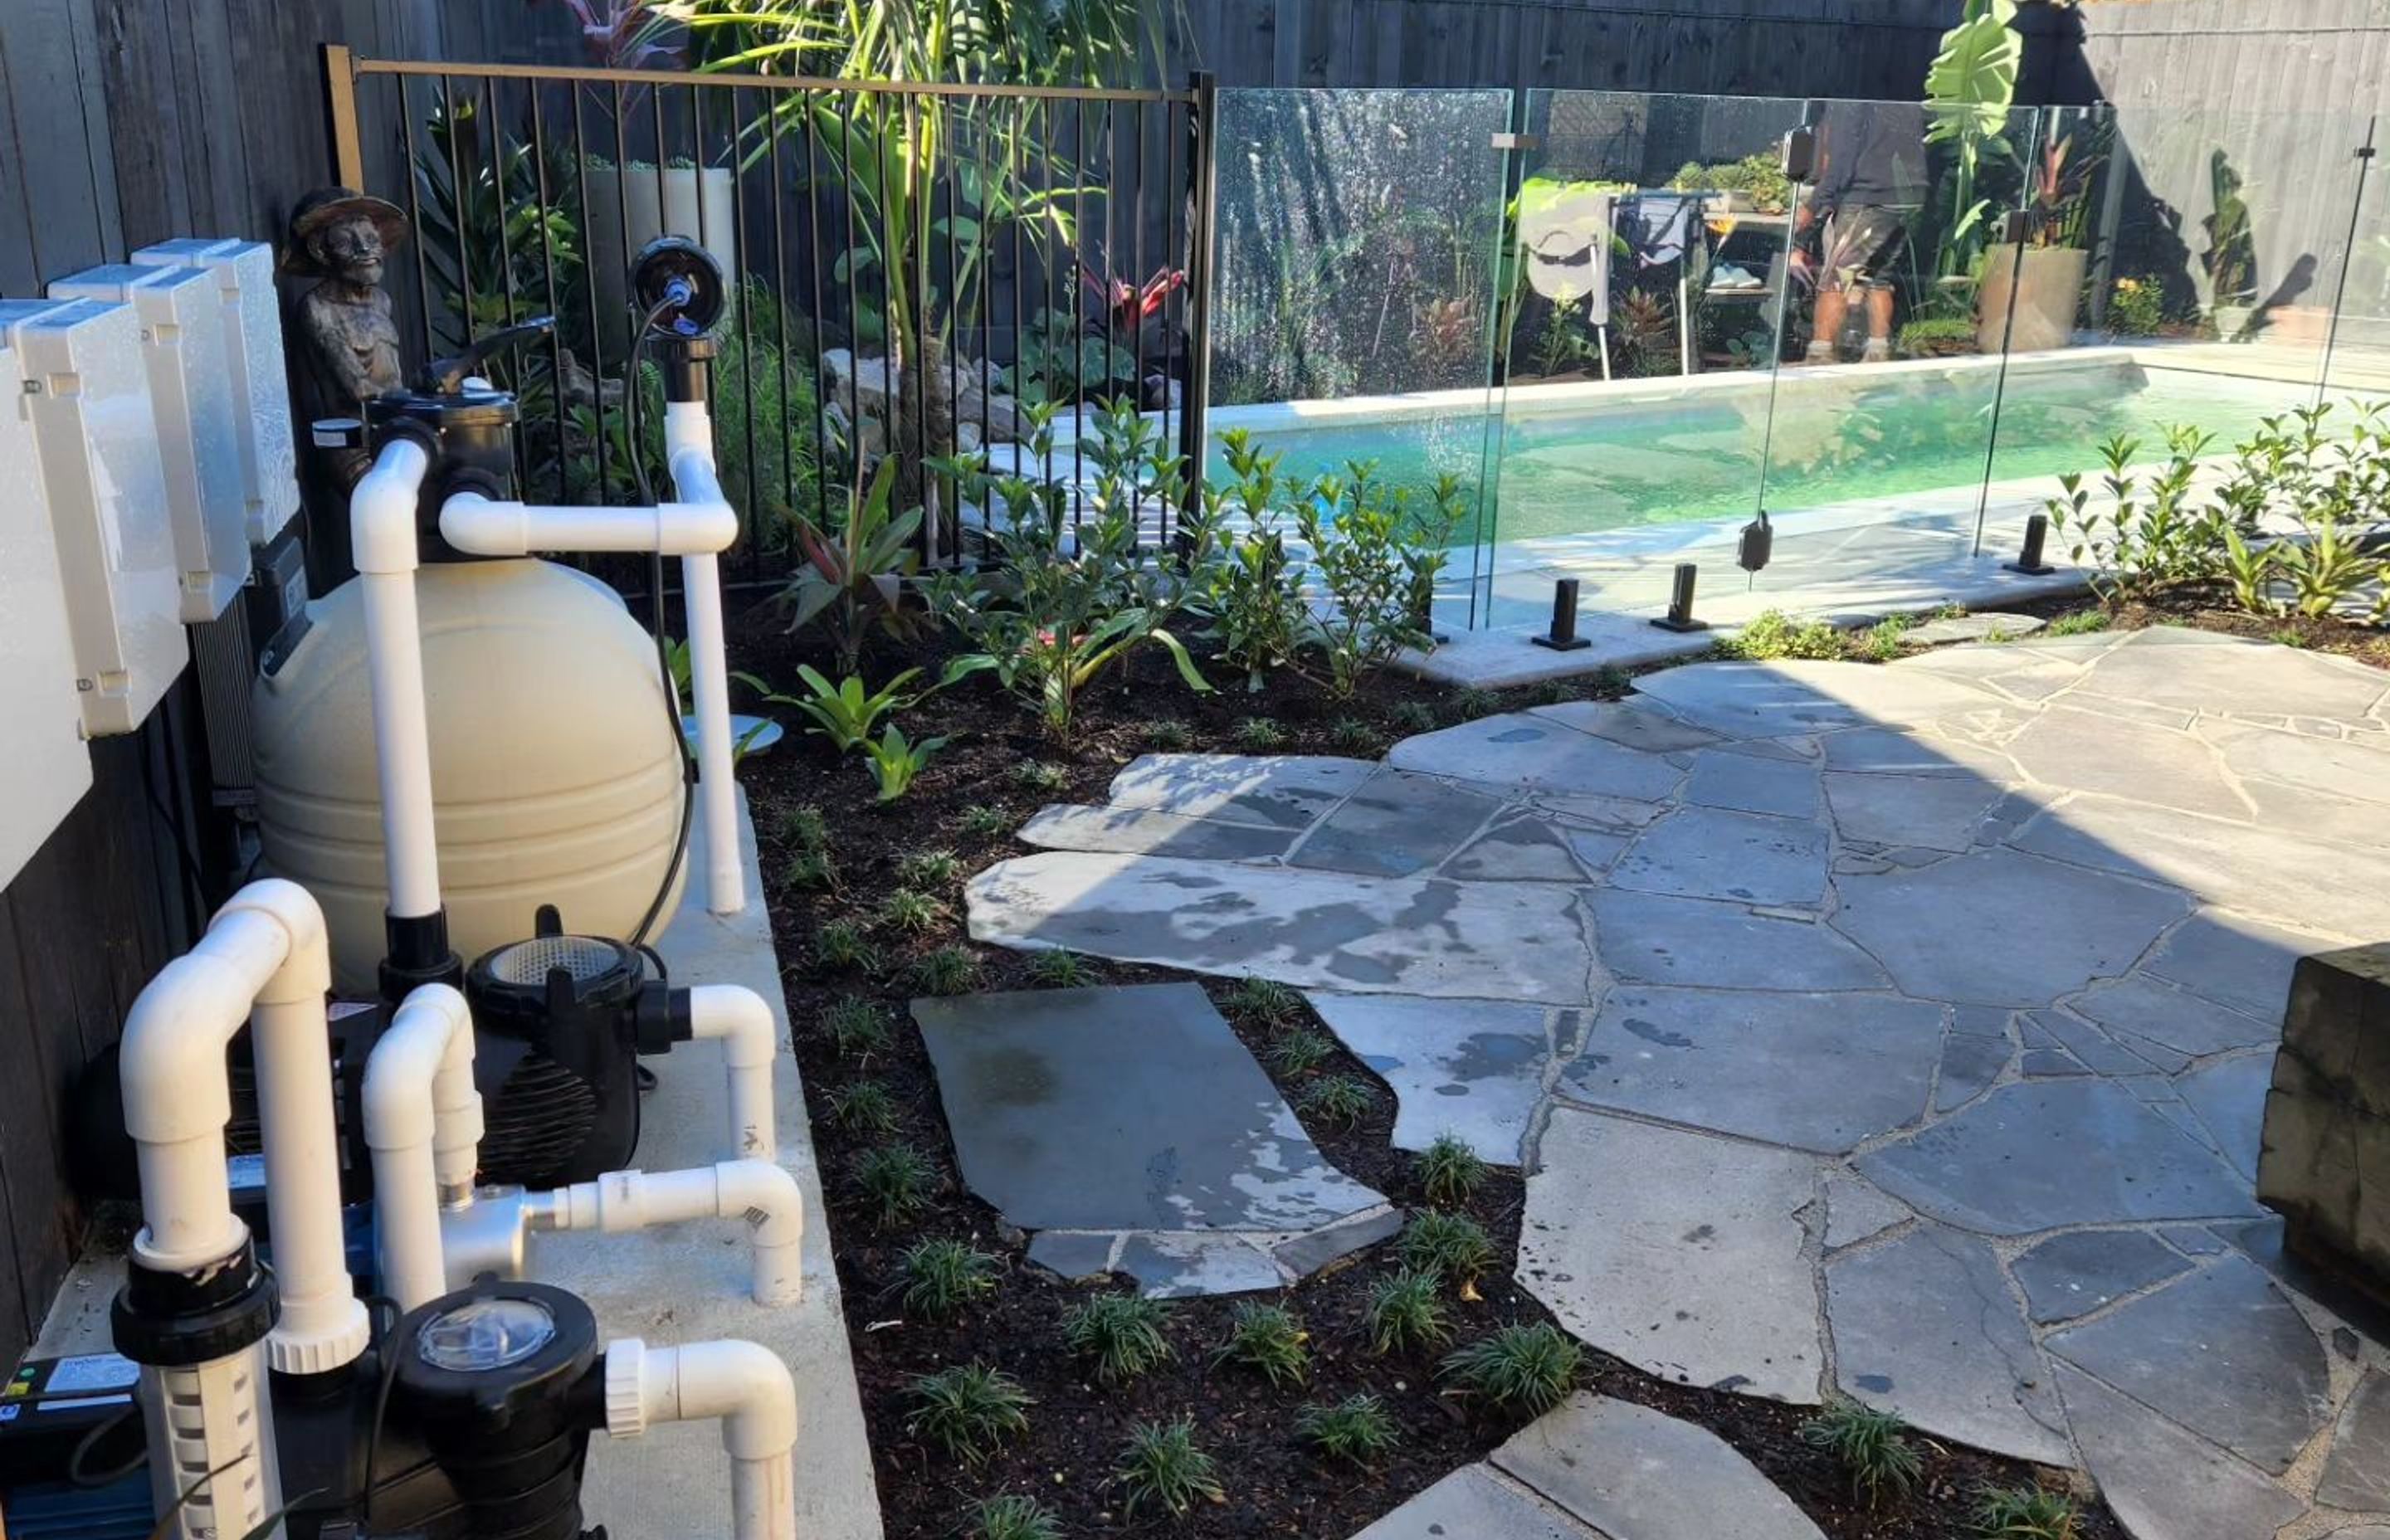 Without a pool pump cover, the pump is unsightly and unprotected.